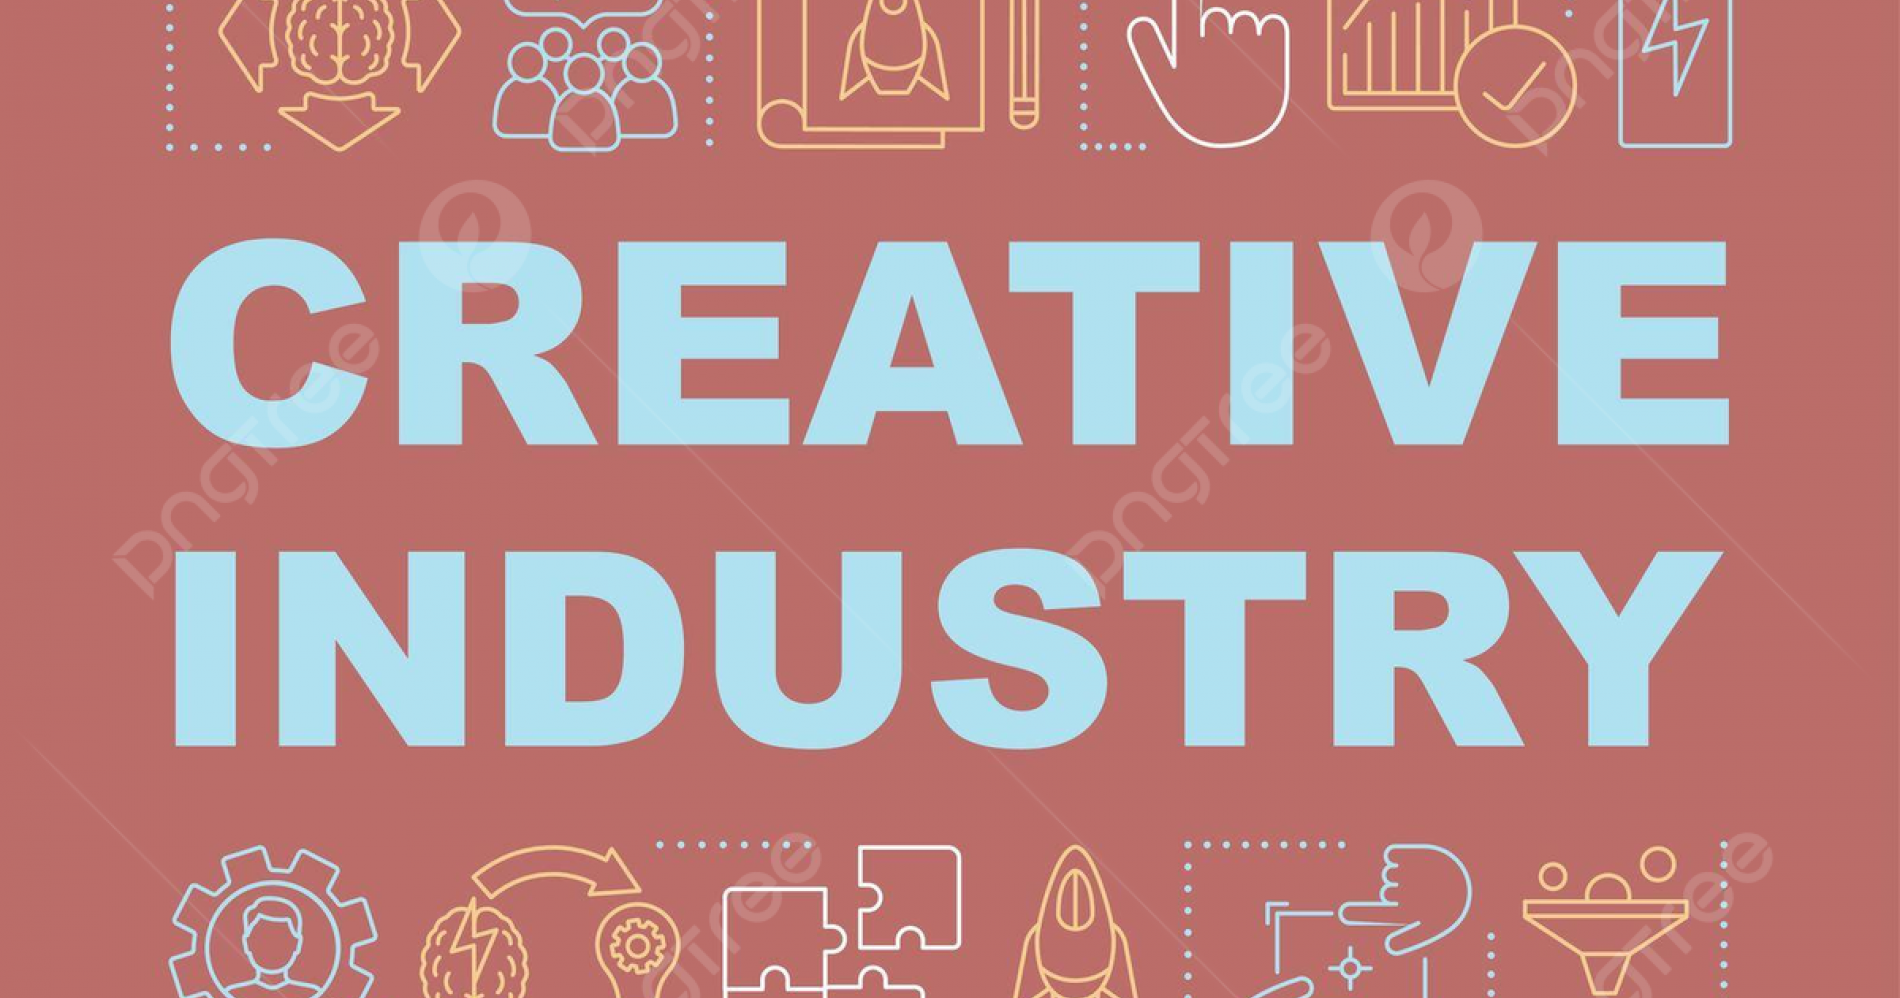 Sumber : https://pngtree.com/so/creative-industry